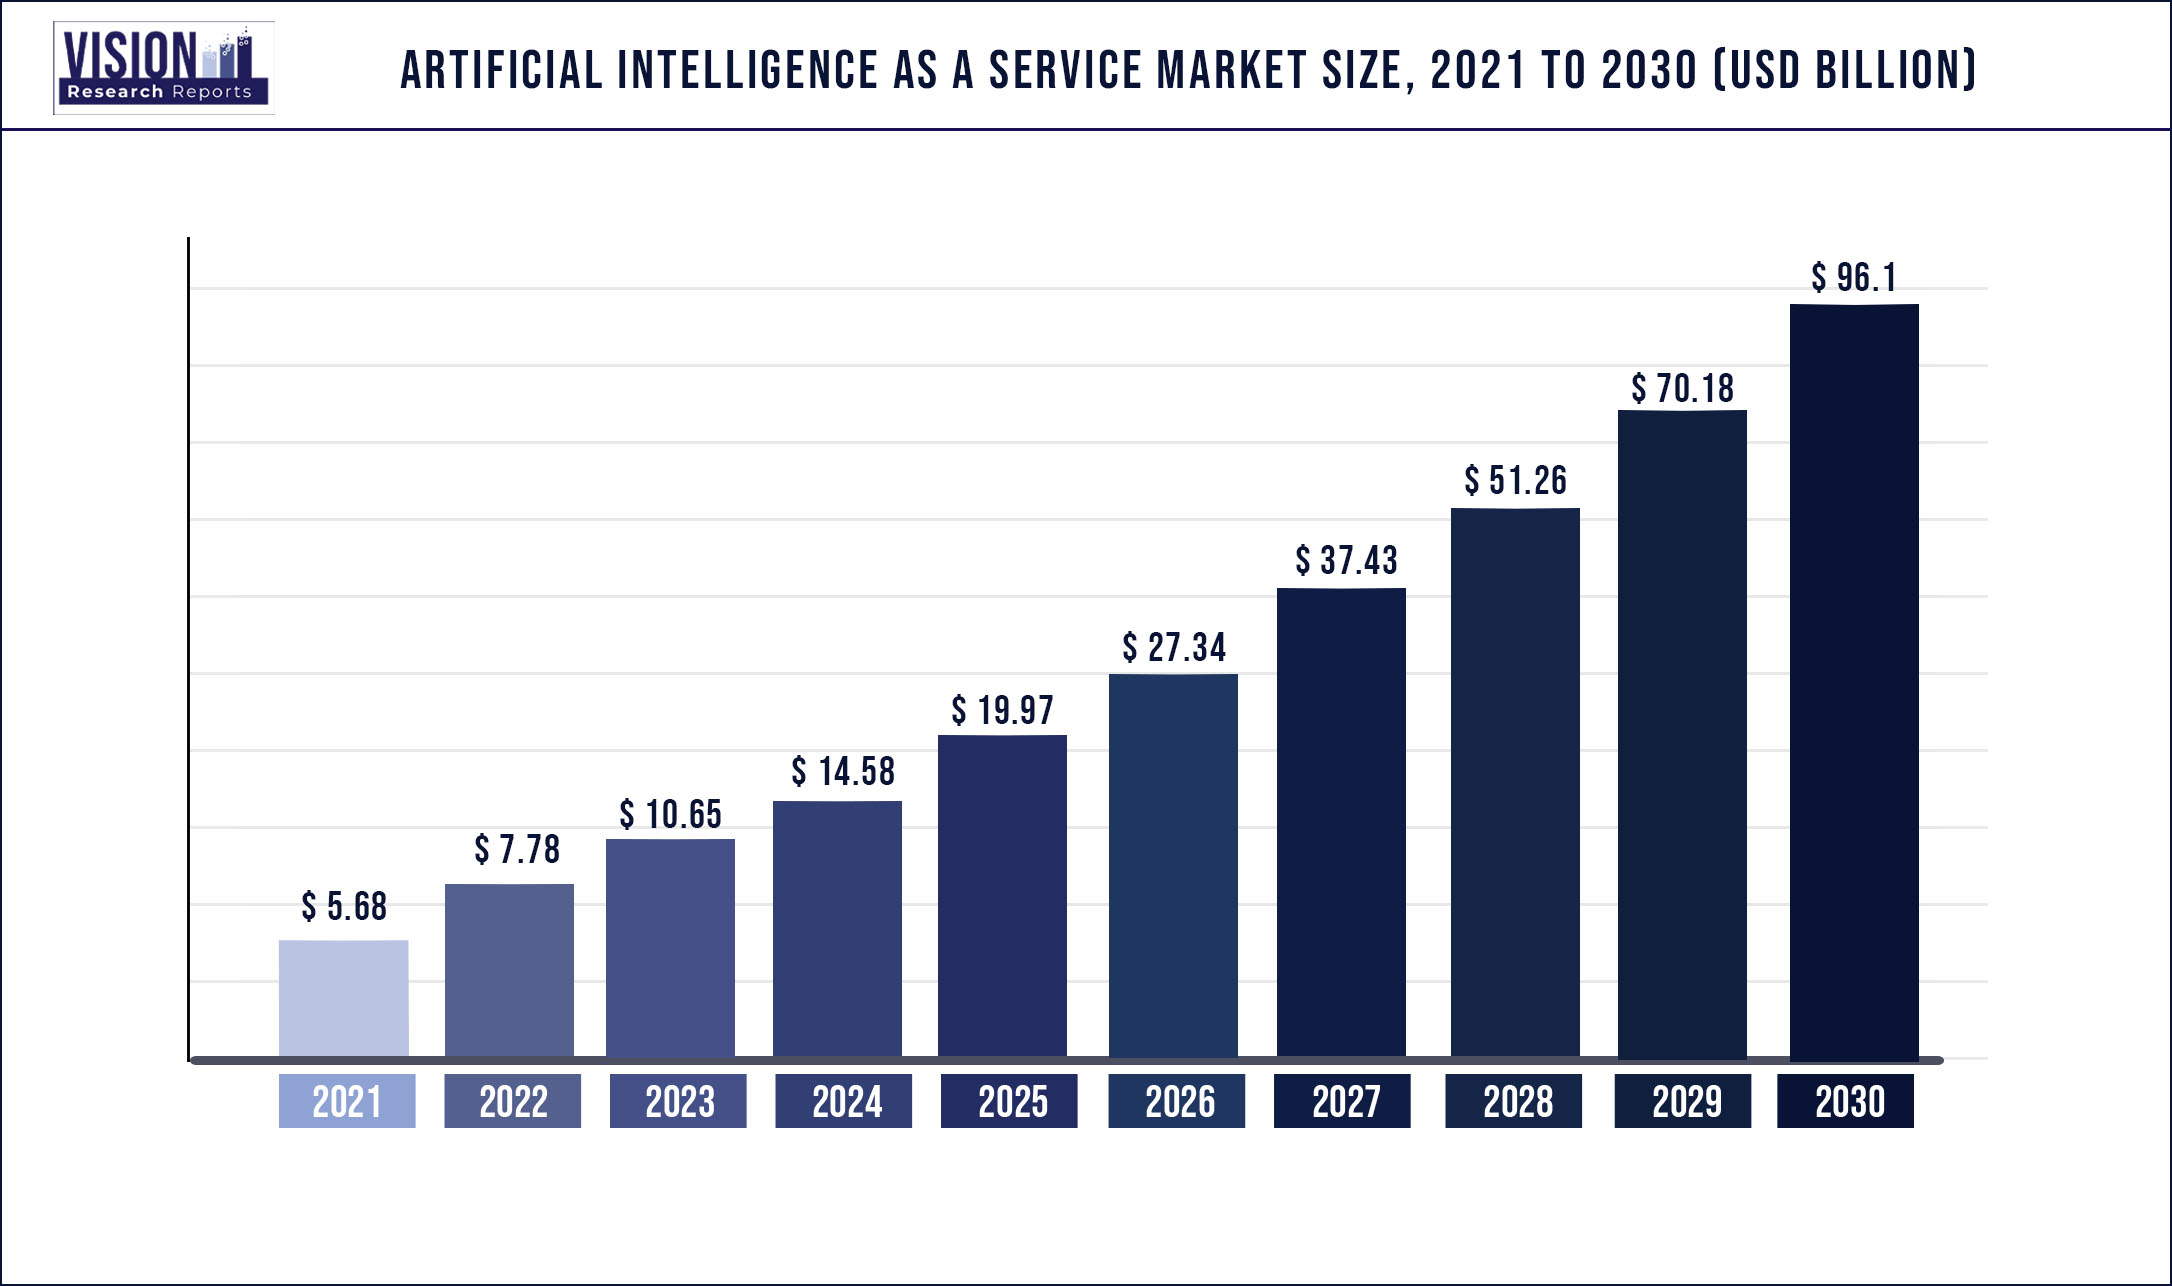 Artificial Intelligence As A Service Market Size 2021 to 2030